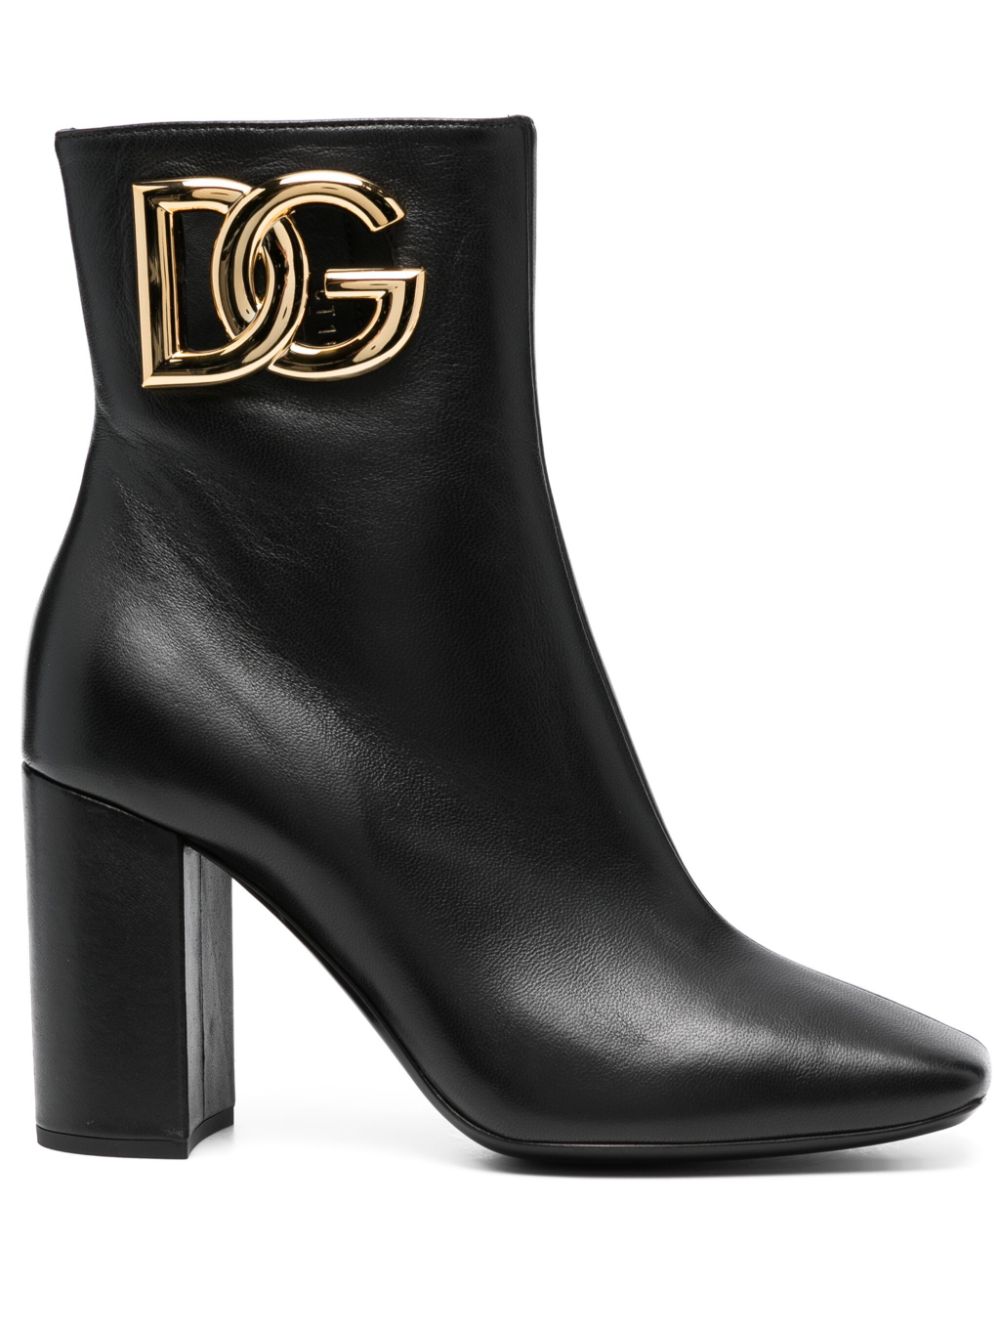 DOLCE & GABBANA 90mm Logo-Lettering Leather Boots for Women - FW23 Collection